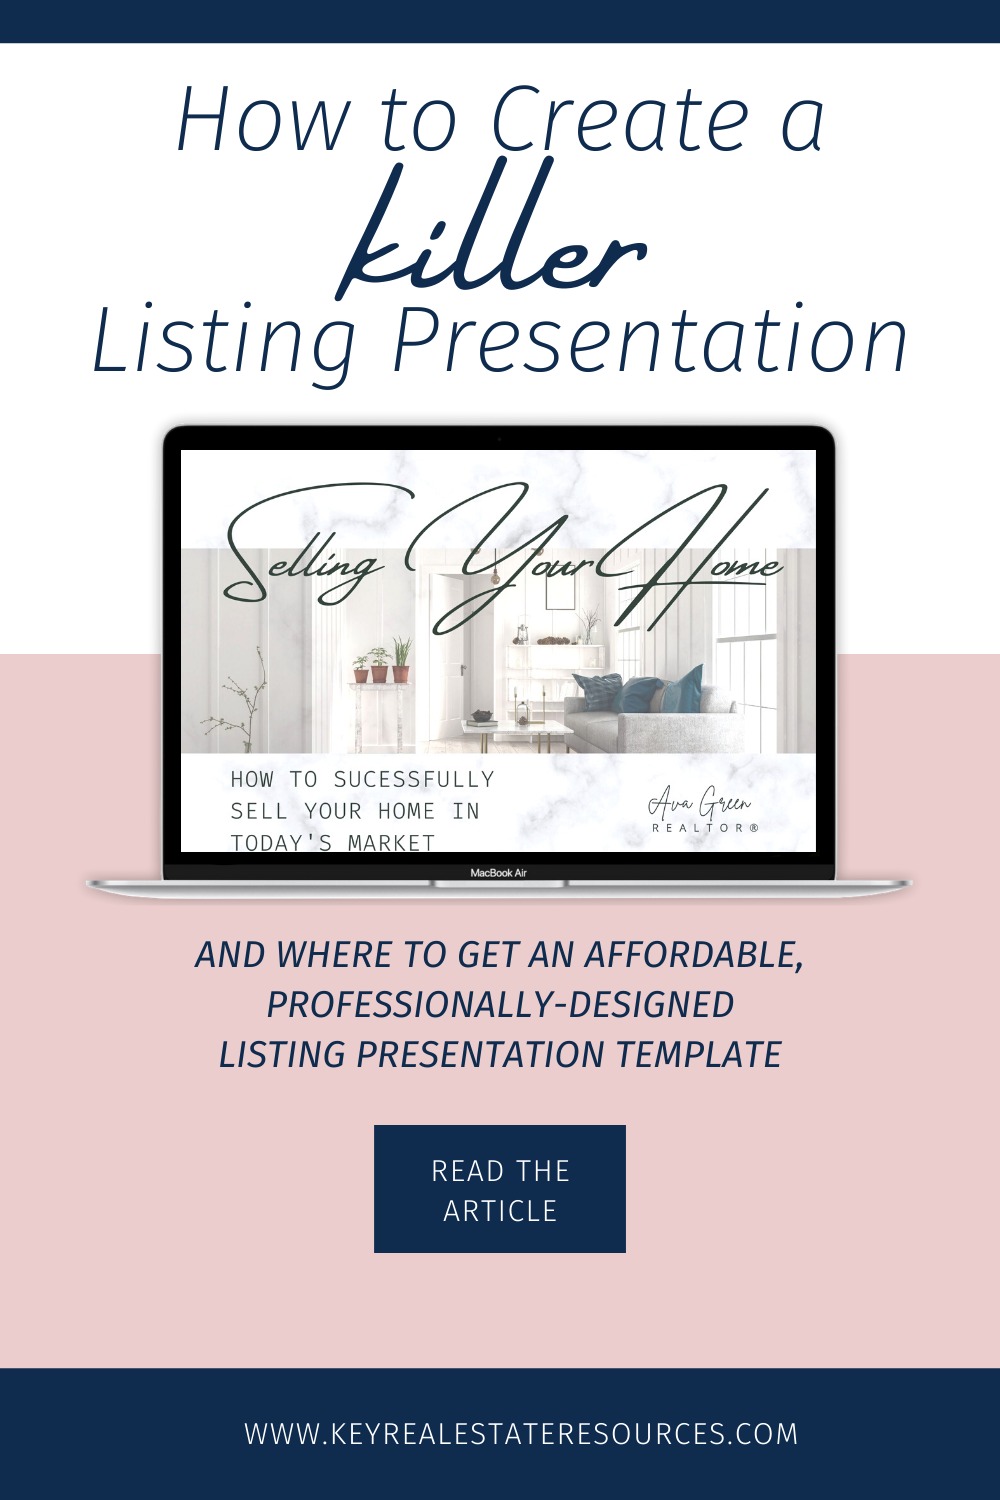 an effective listing presentation includes